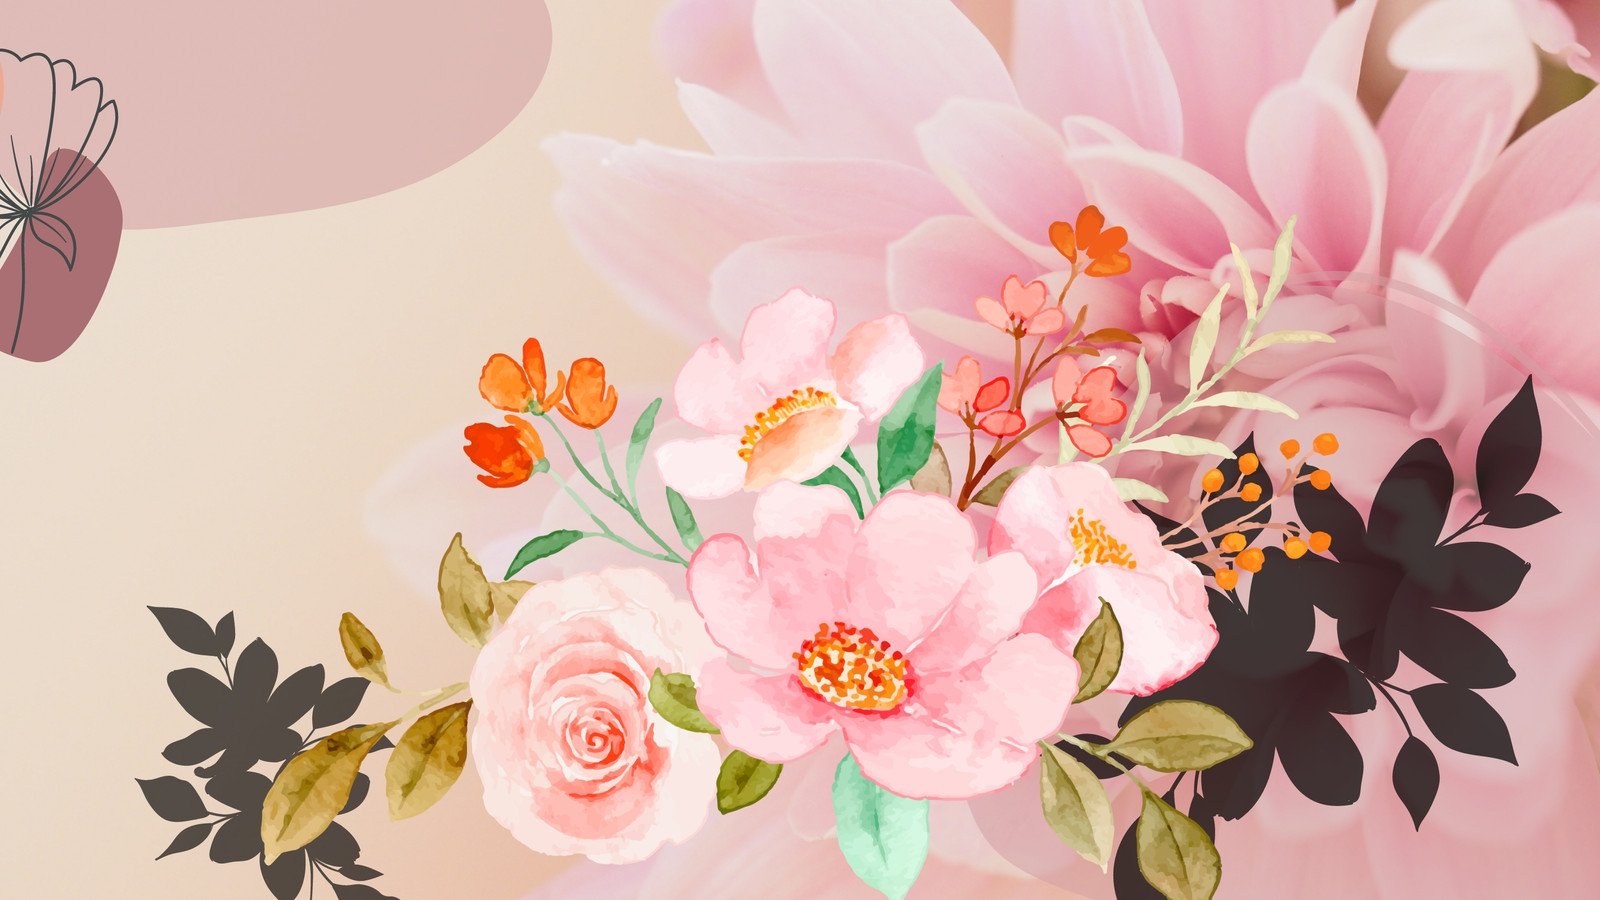 Watercolor flowers iPhone wallpaper background in 2023  Floral print  wallpaper Watercolor flowers Cherry blossom wallpaper